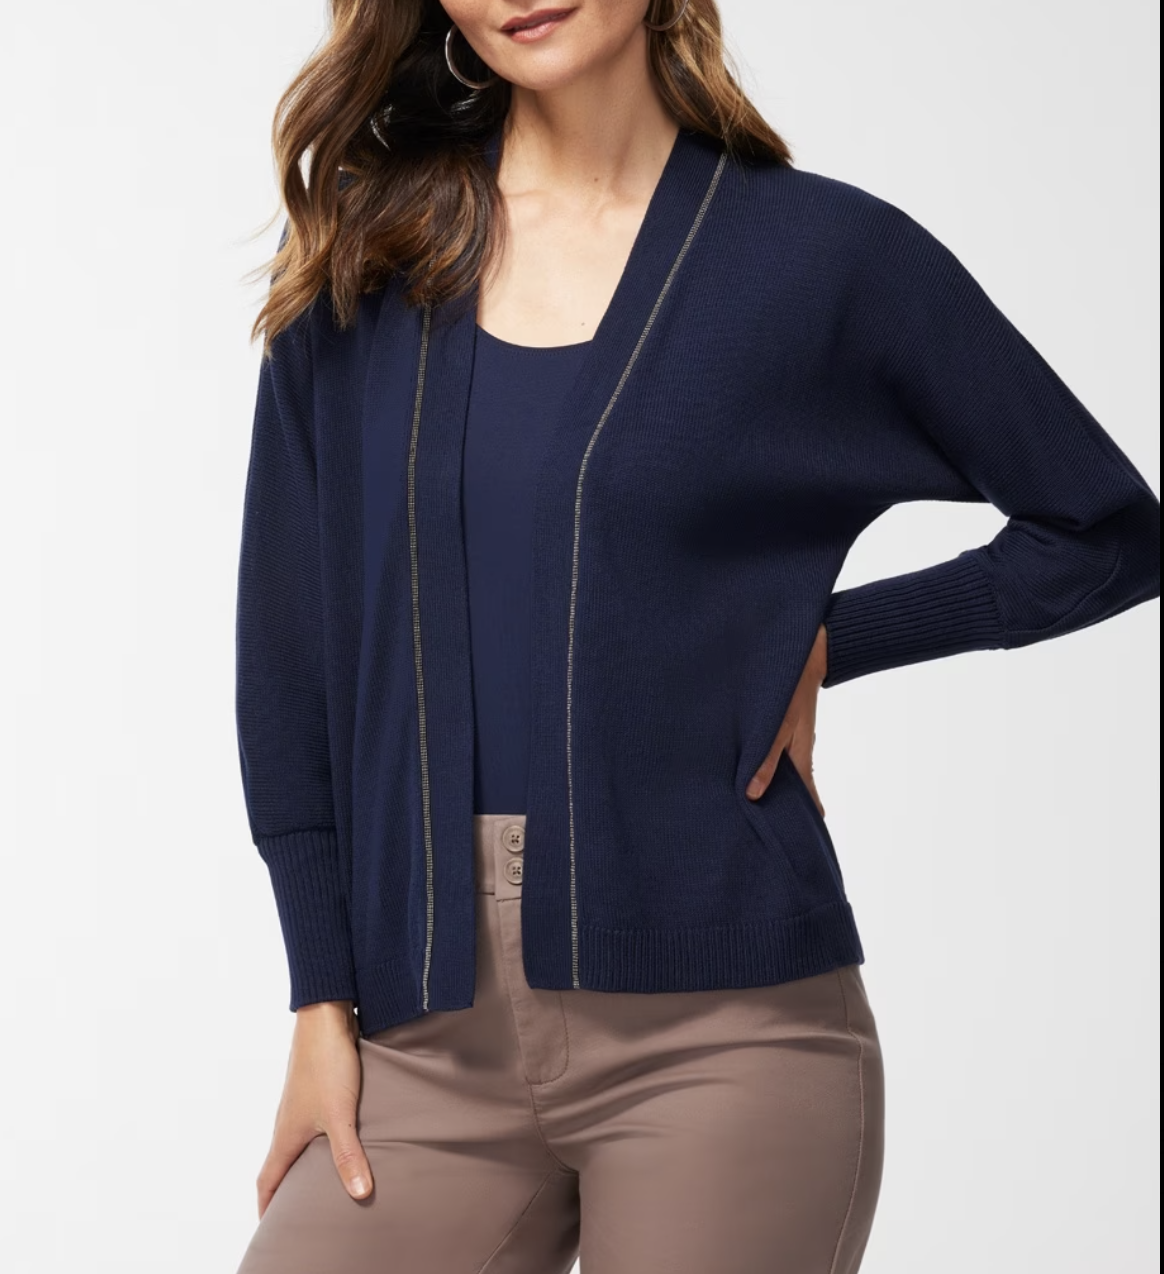 Dolman Cardigan from Chico’s